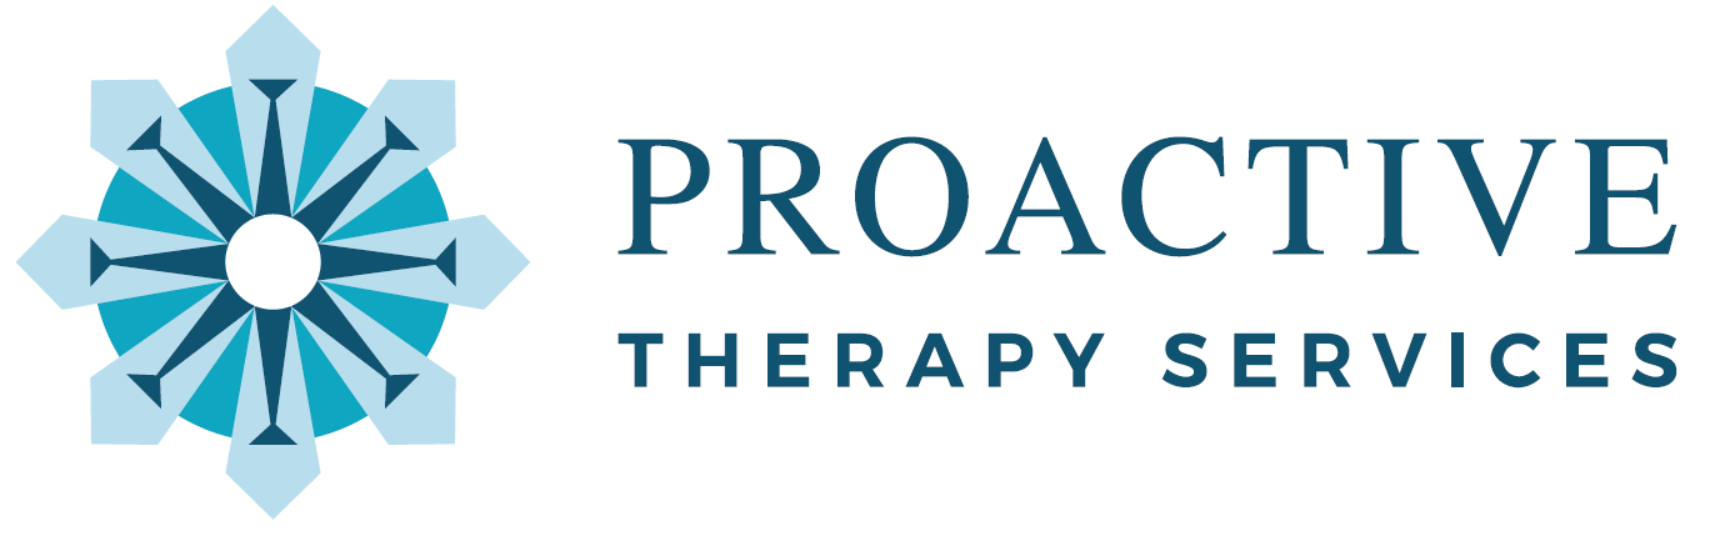 Proactive Therapy Services